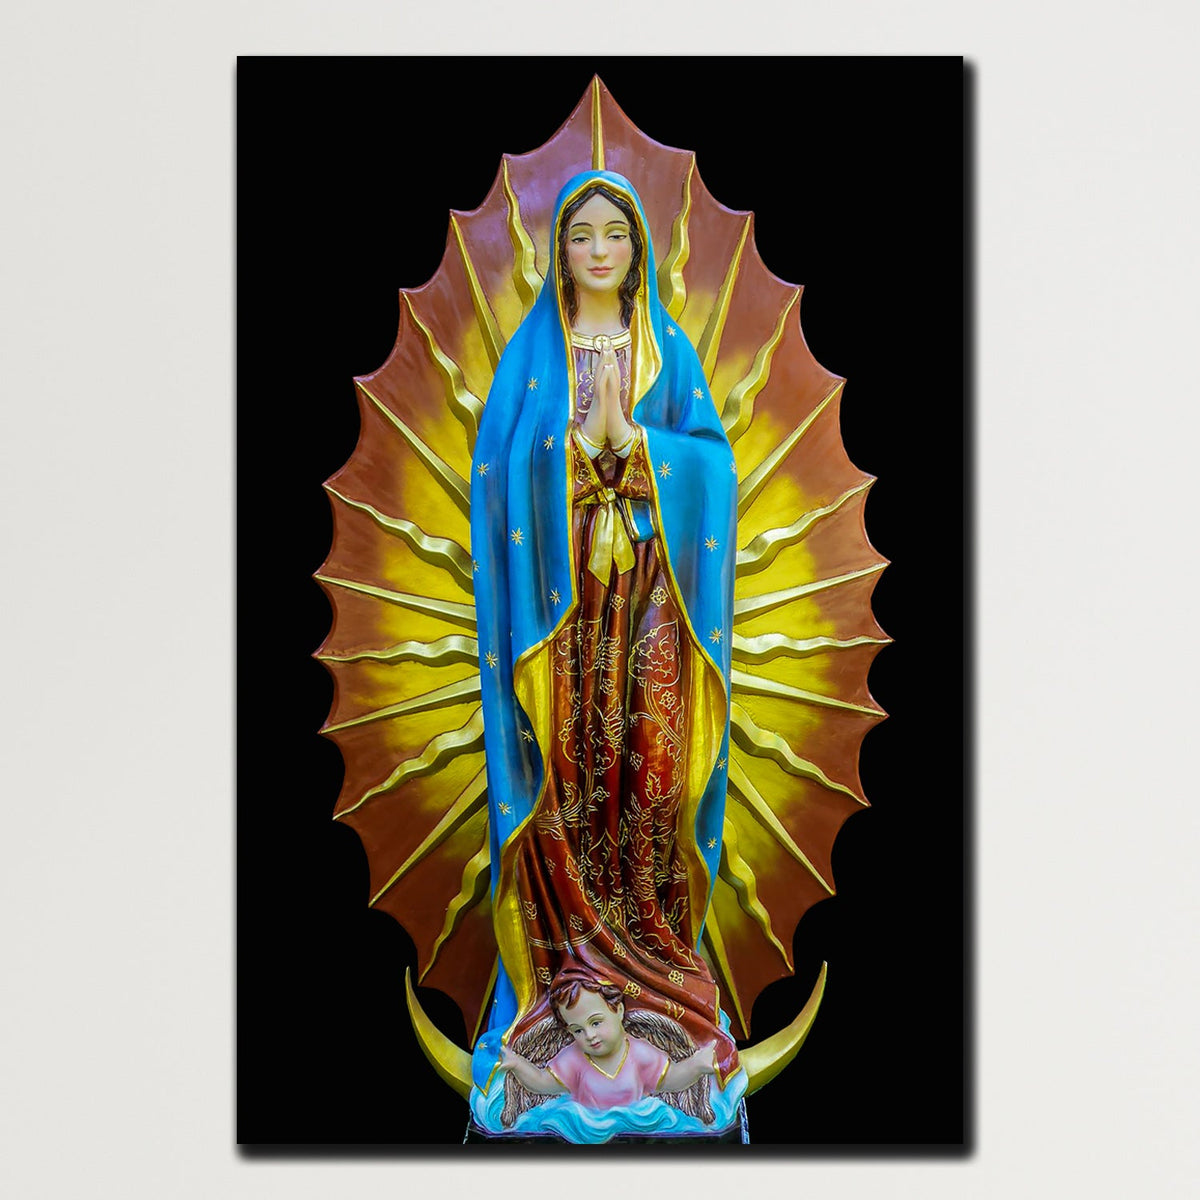 https://cdn.shopify.com/s/files/1/0387/9986/8044/products/MaryOurLadyOfGuadalupeCanvasArtprintStretched-Plain.jpg